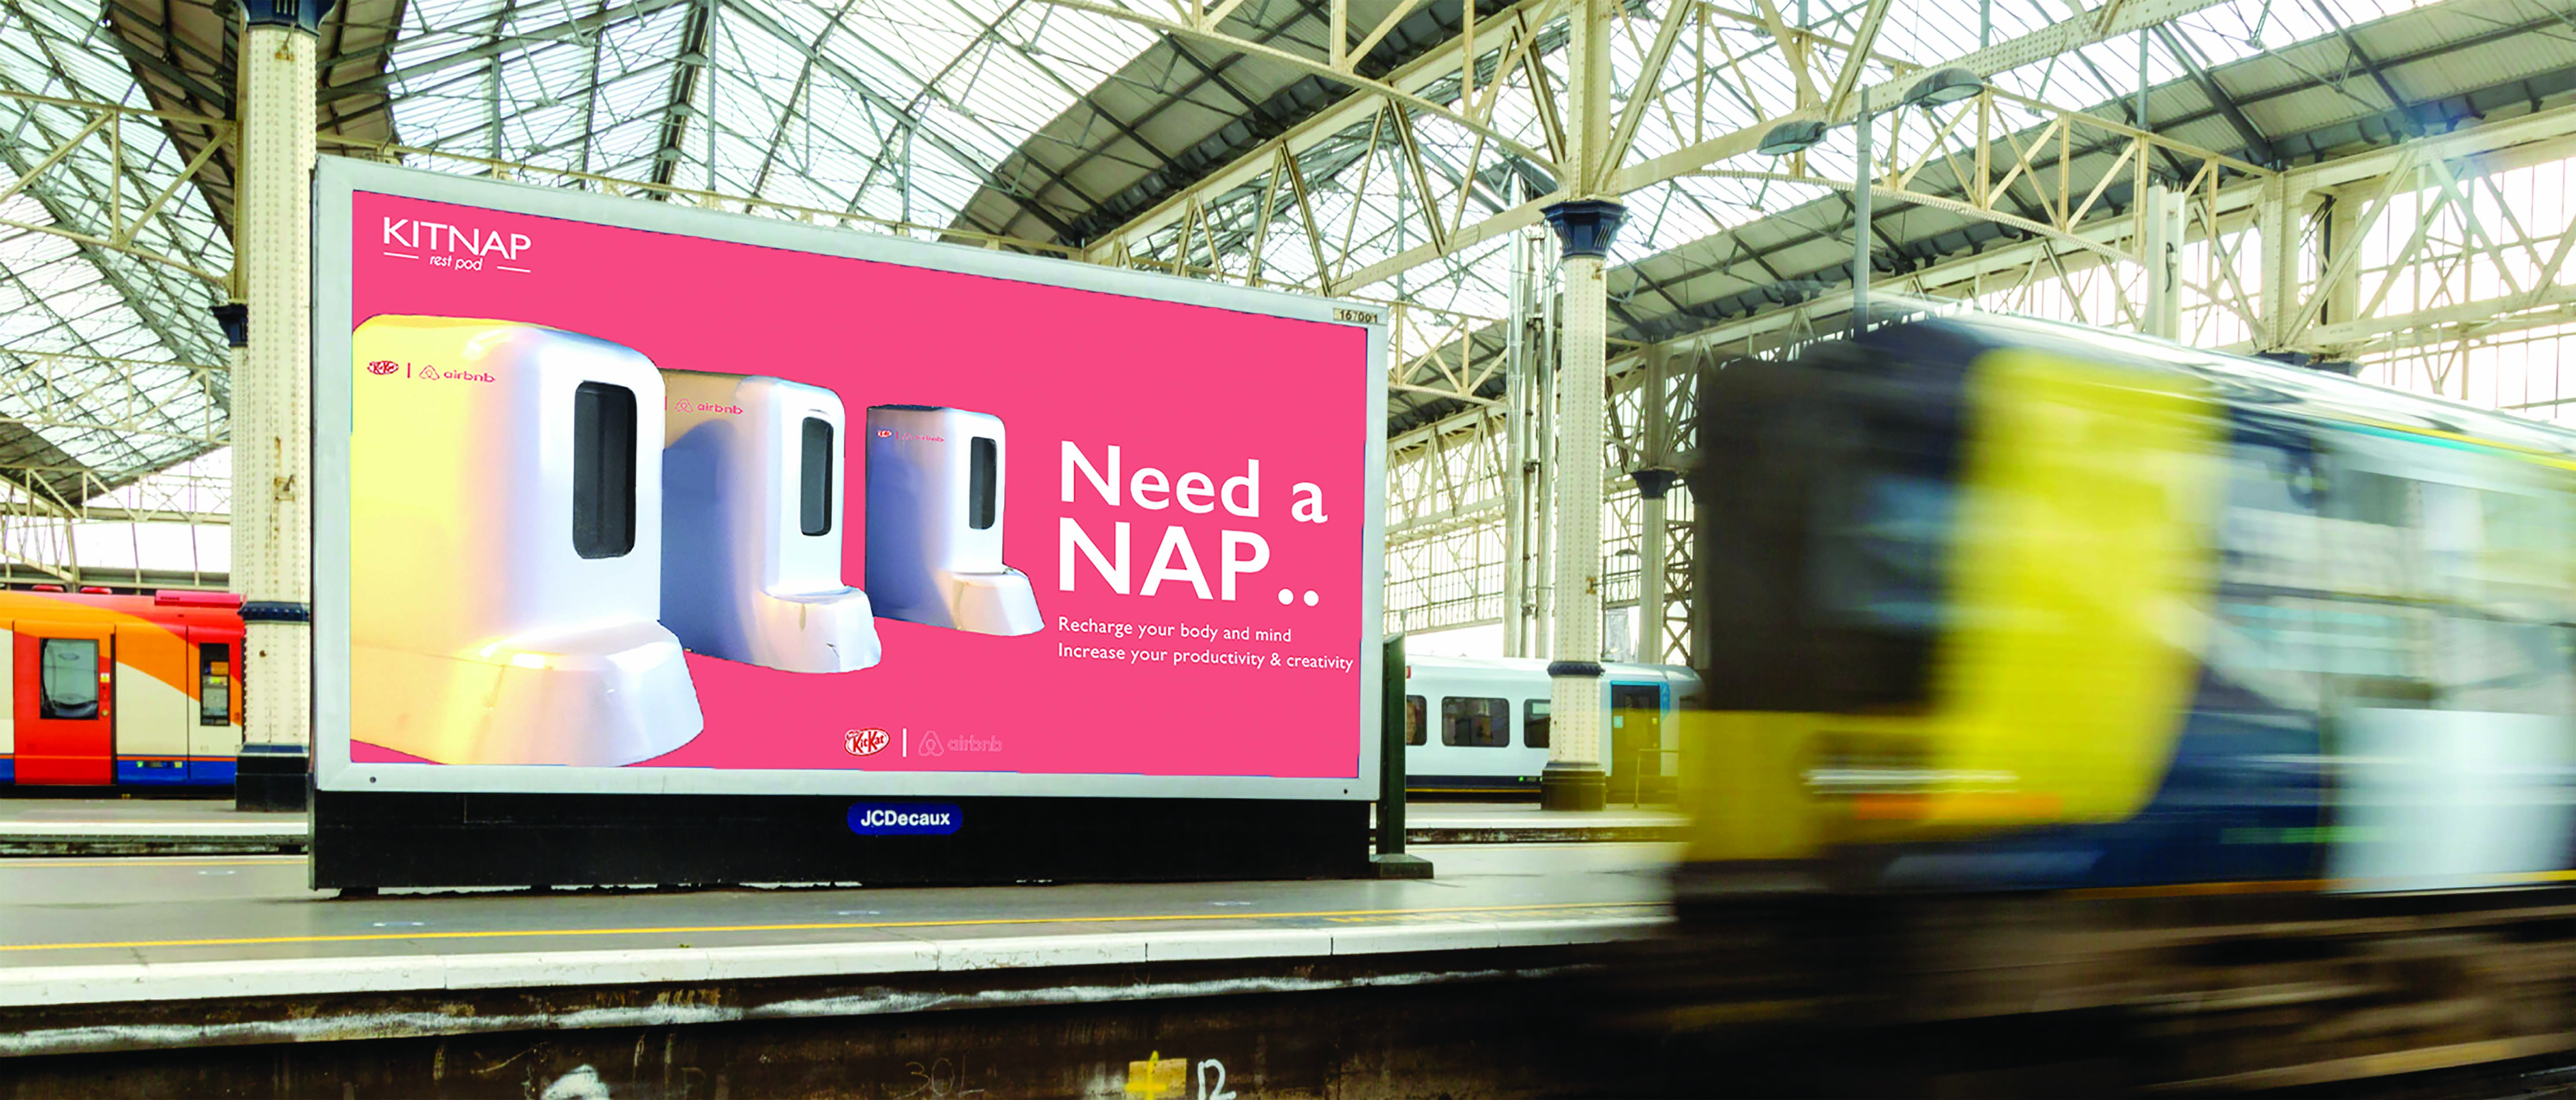 Mock up billboard with images of three 'rest pods' on a red background and the text 'need a NAP' in white ro the right.